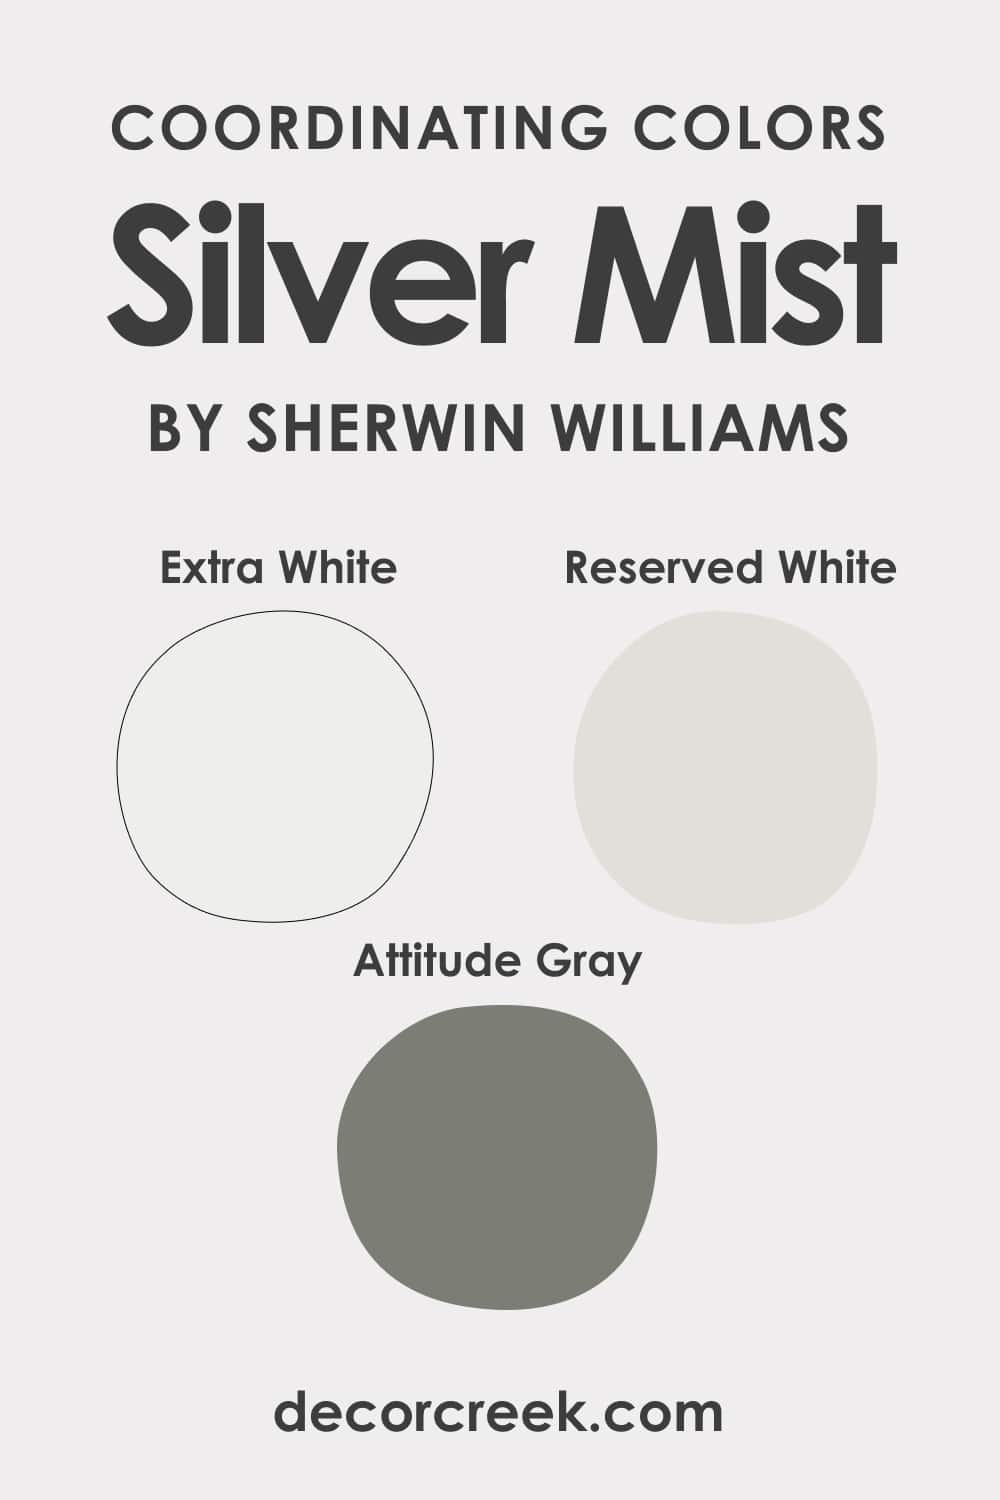 Silver Mist SW-7621 Coordinating Colors